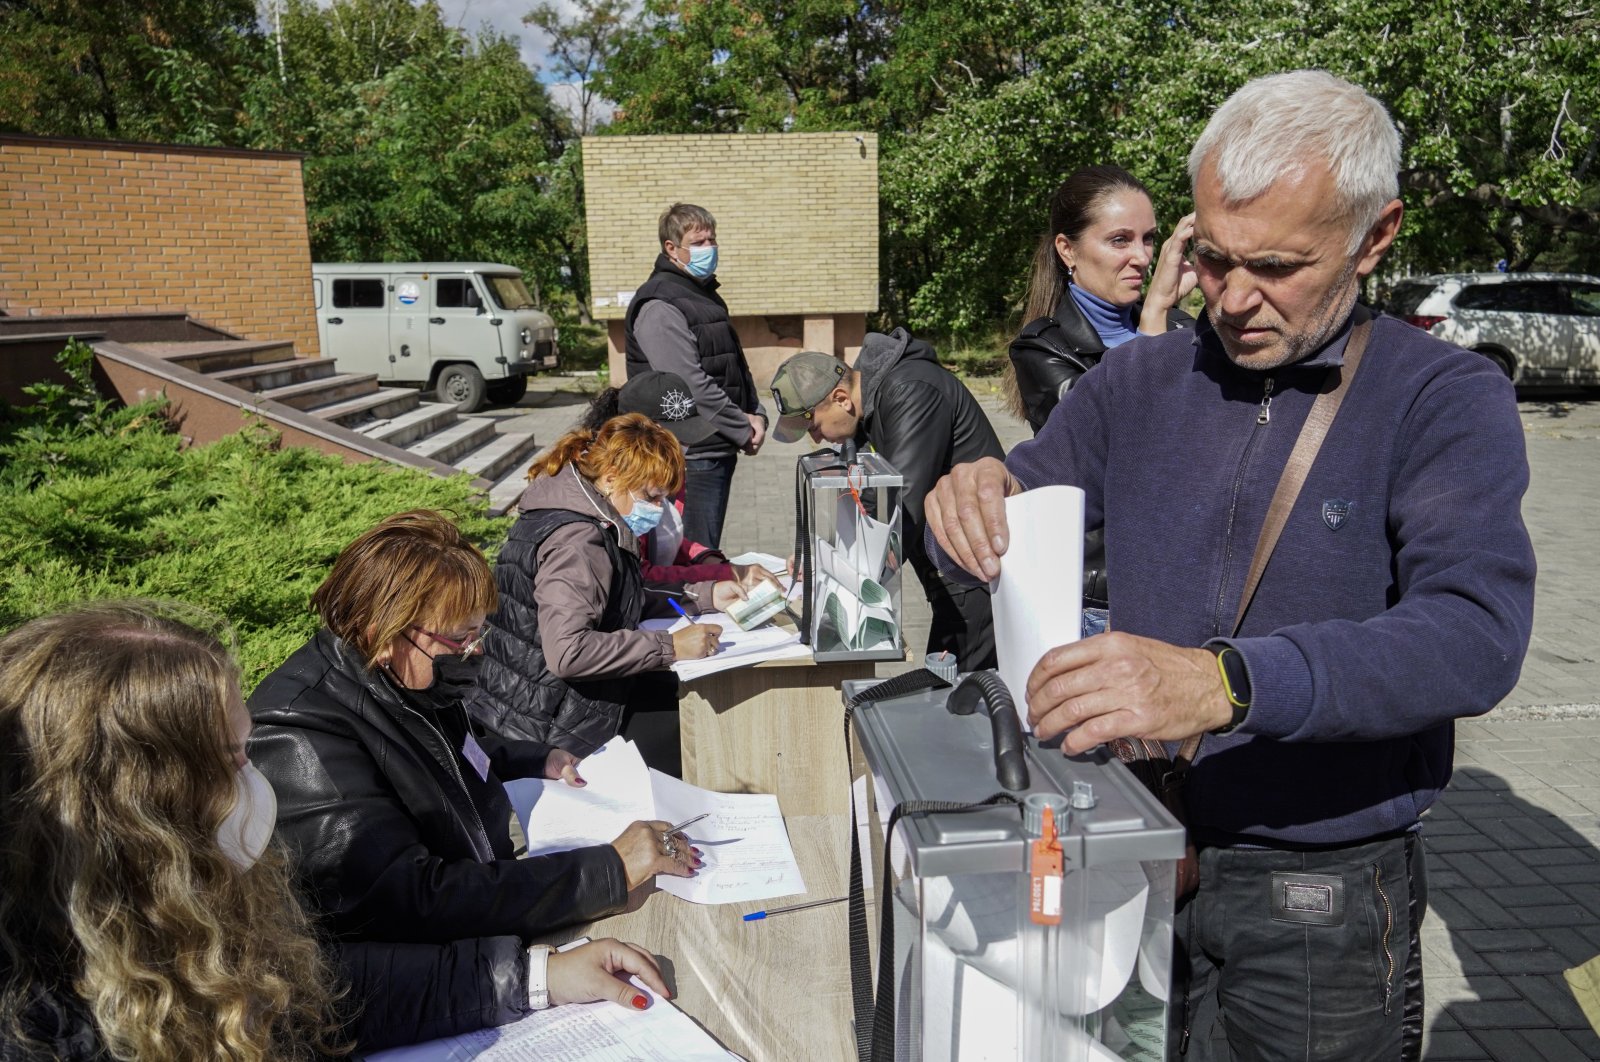 A man casts his ballot during a referendum on the joining of Russian-controlled regions of Ukraine to Russia, at an outdoor polling station in Mariupol, eastern Ukraine, Sept. 25, 2022. (EPA Photo)